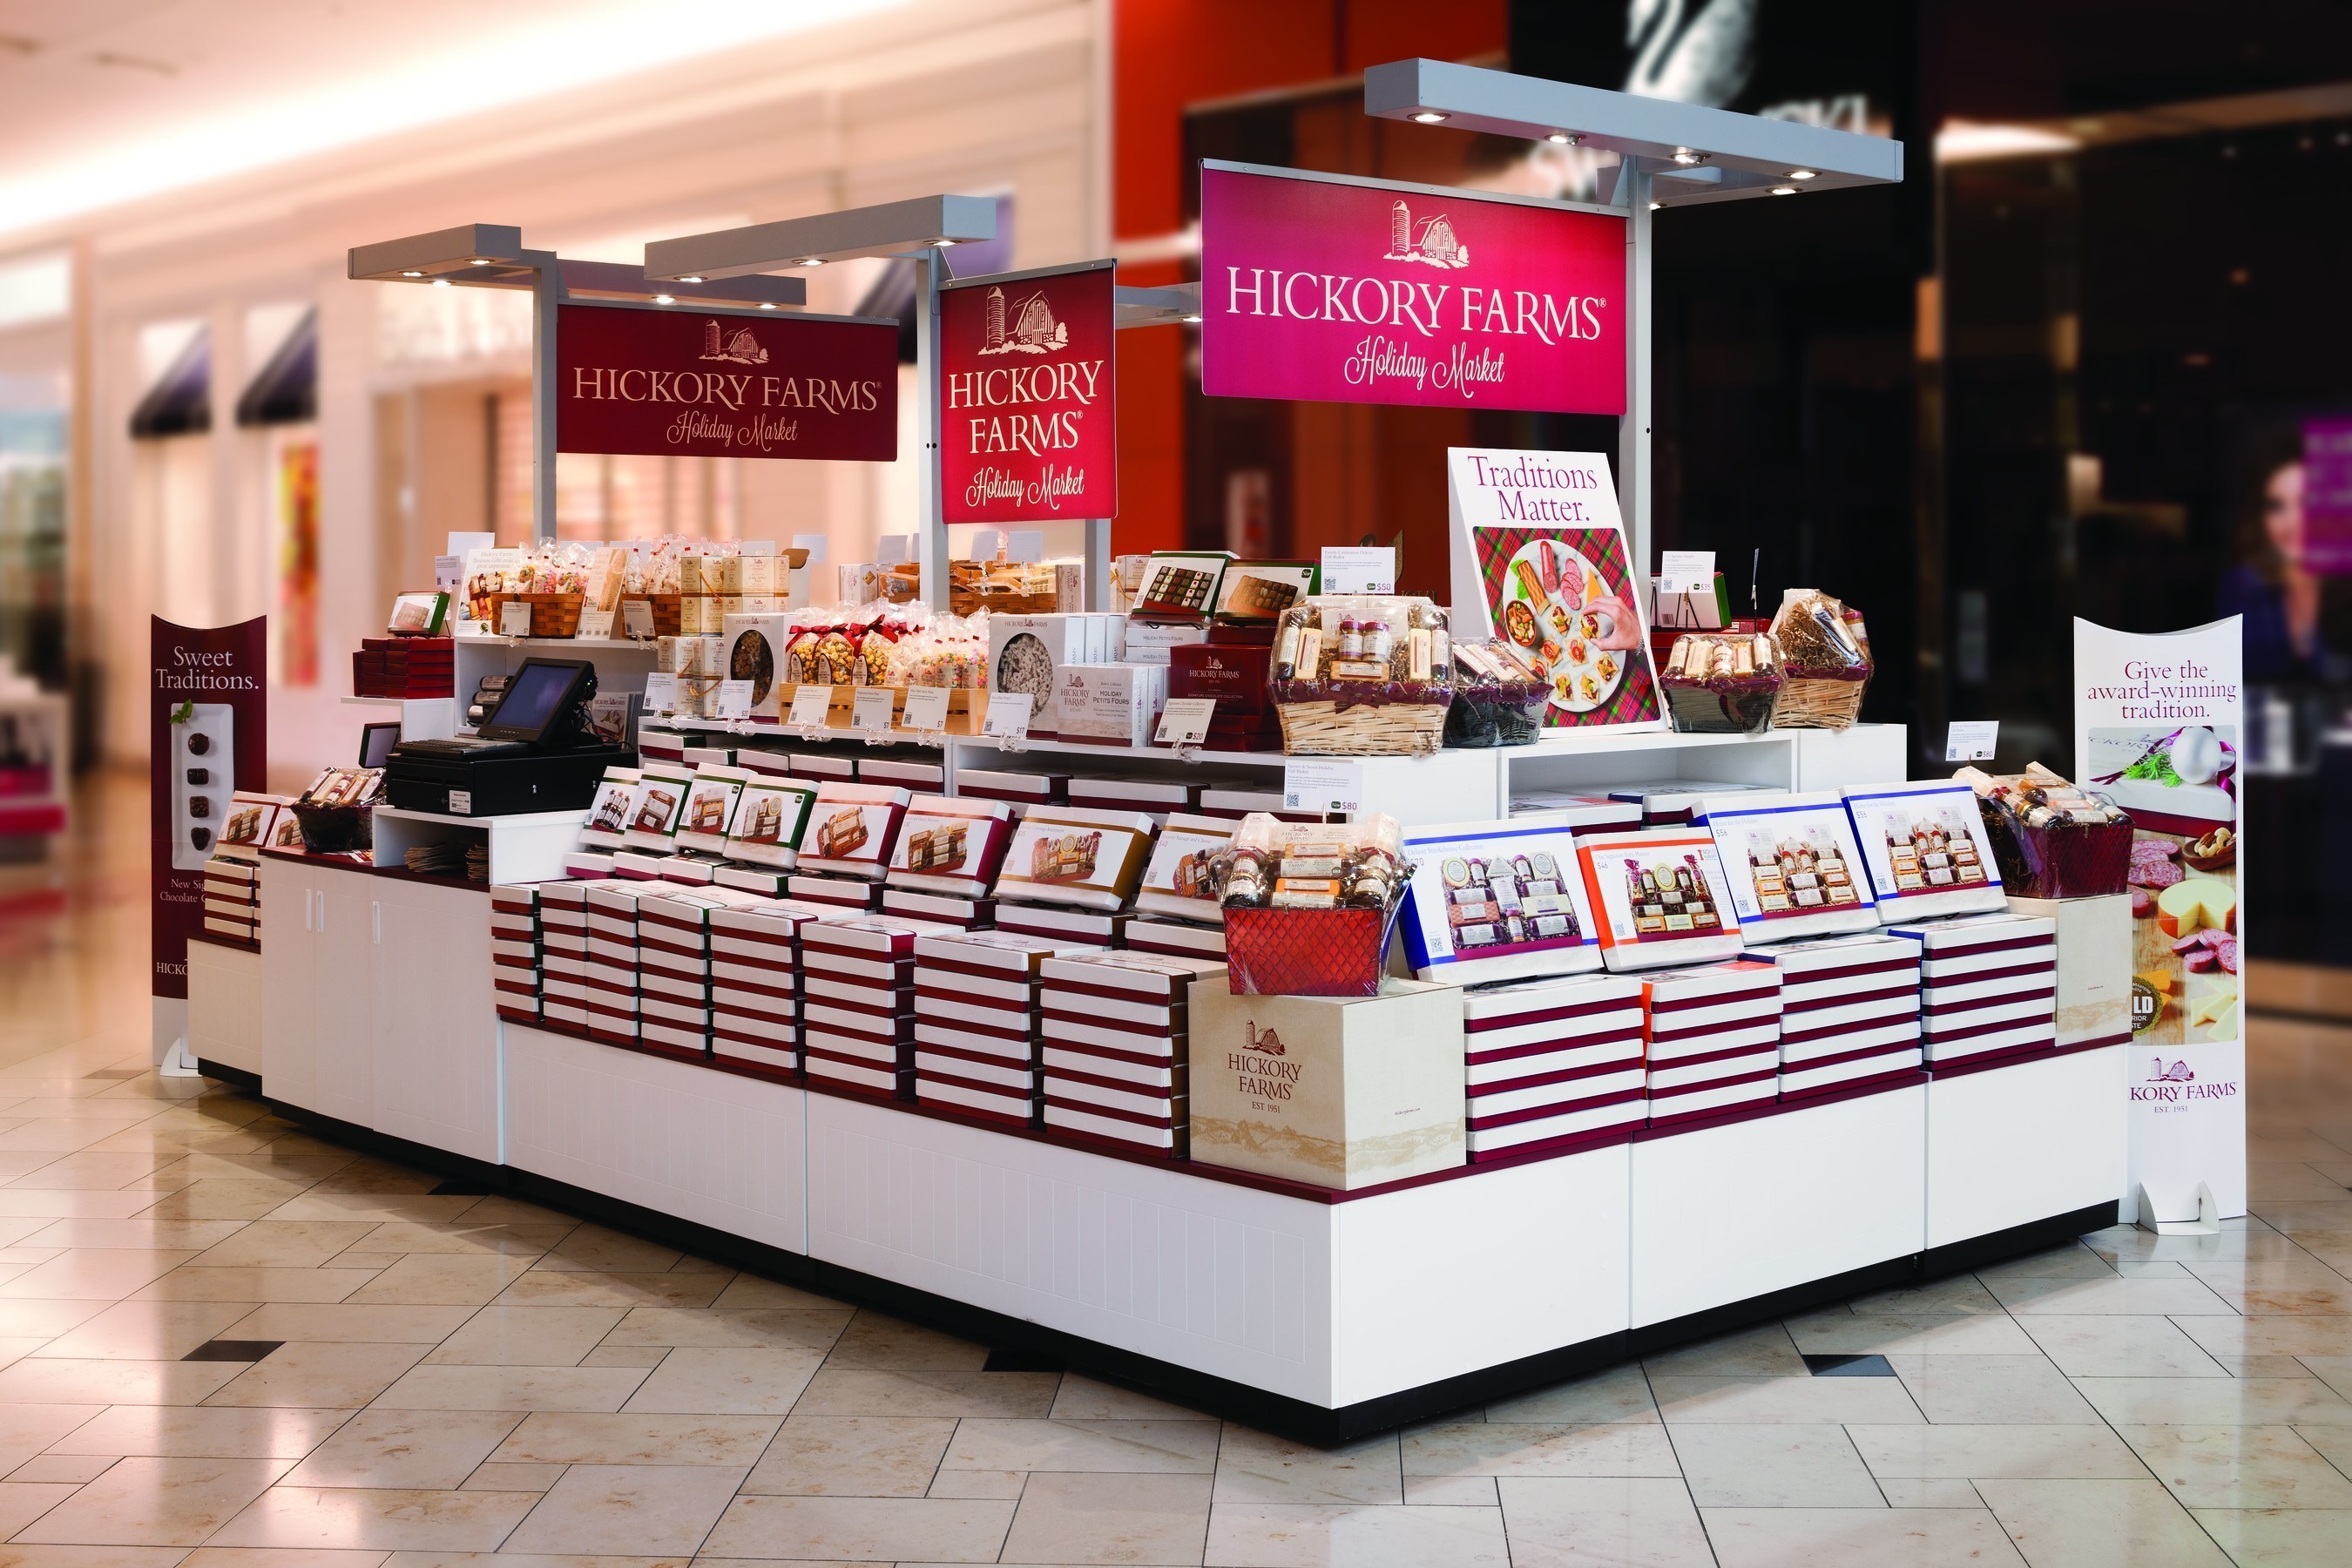 Today, Hickory Farms, Inc. announced the official opening of 700 Holiday Markets in shopping malls throughout North America for the 2014 holiday season.